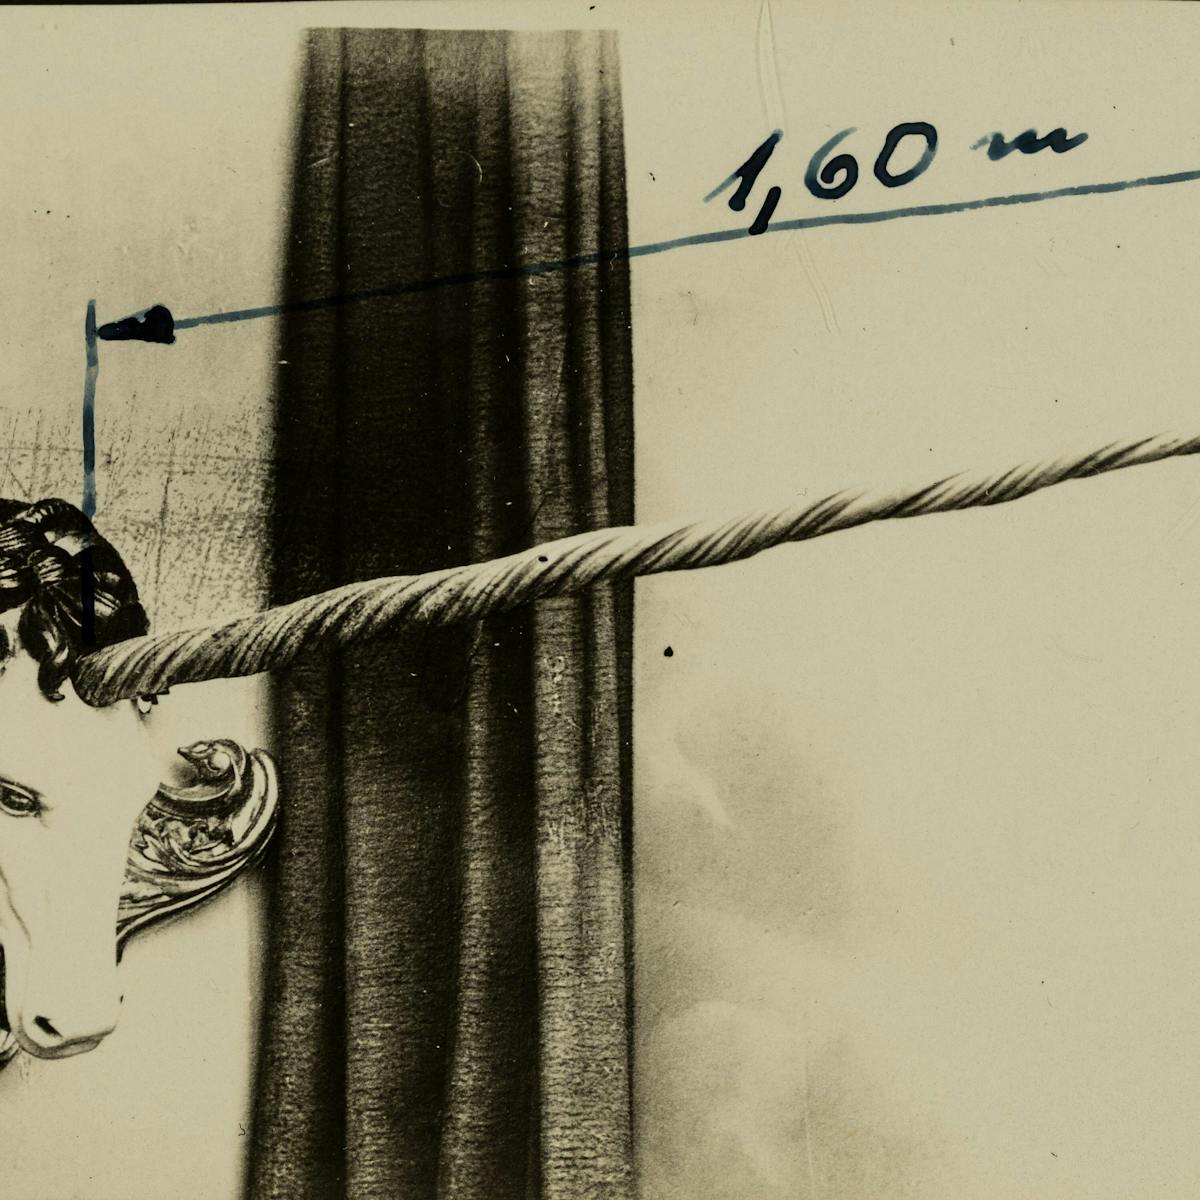 Photograph of a mounted unicorn head with measurement of horn at 1.60m